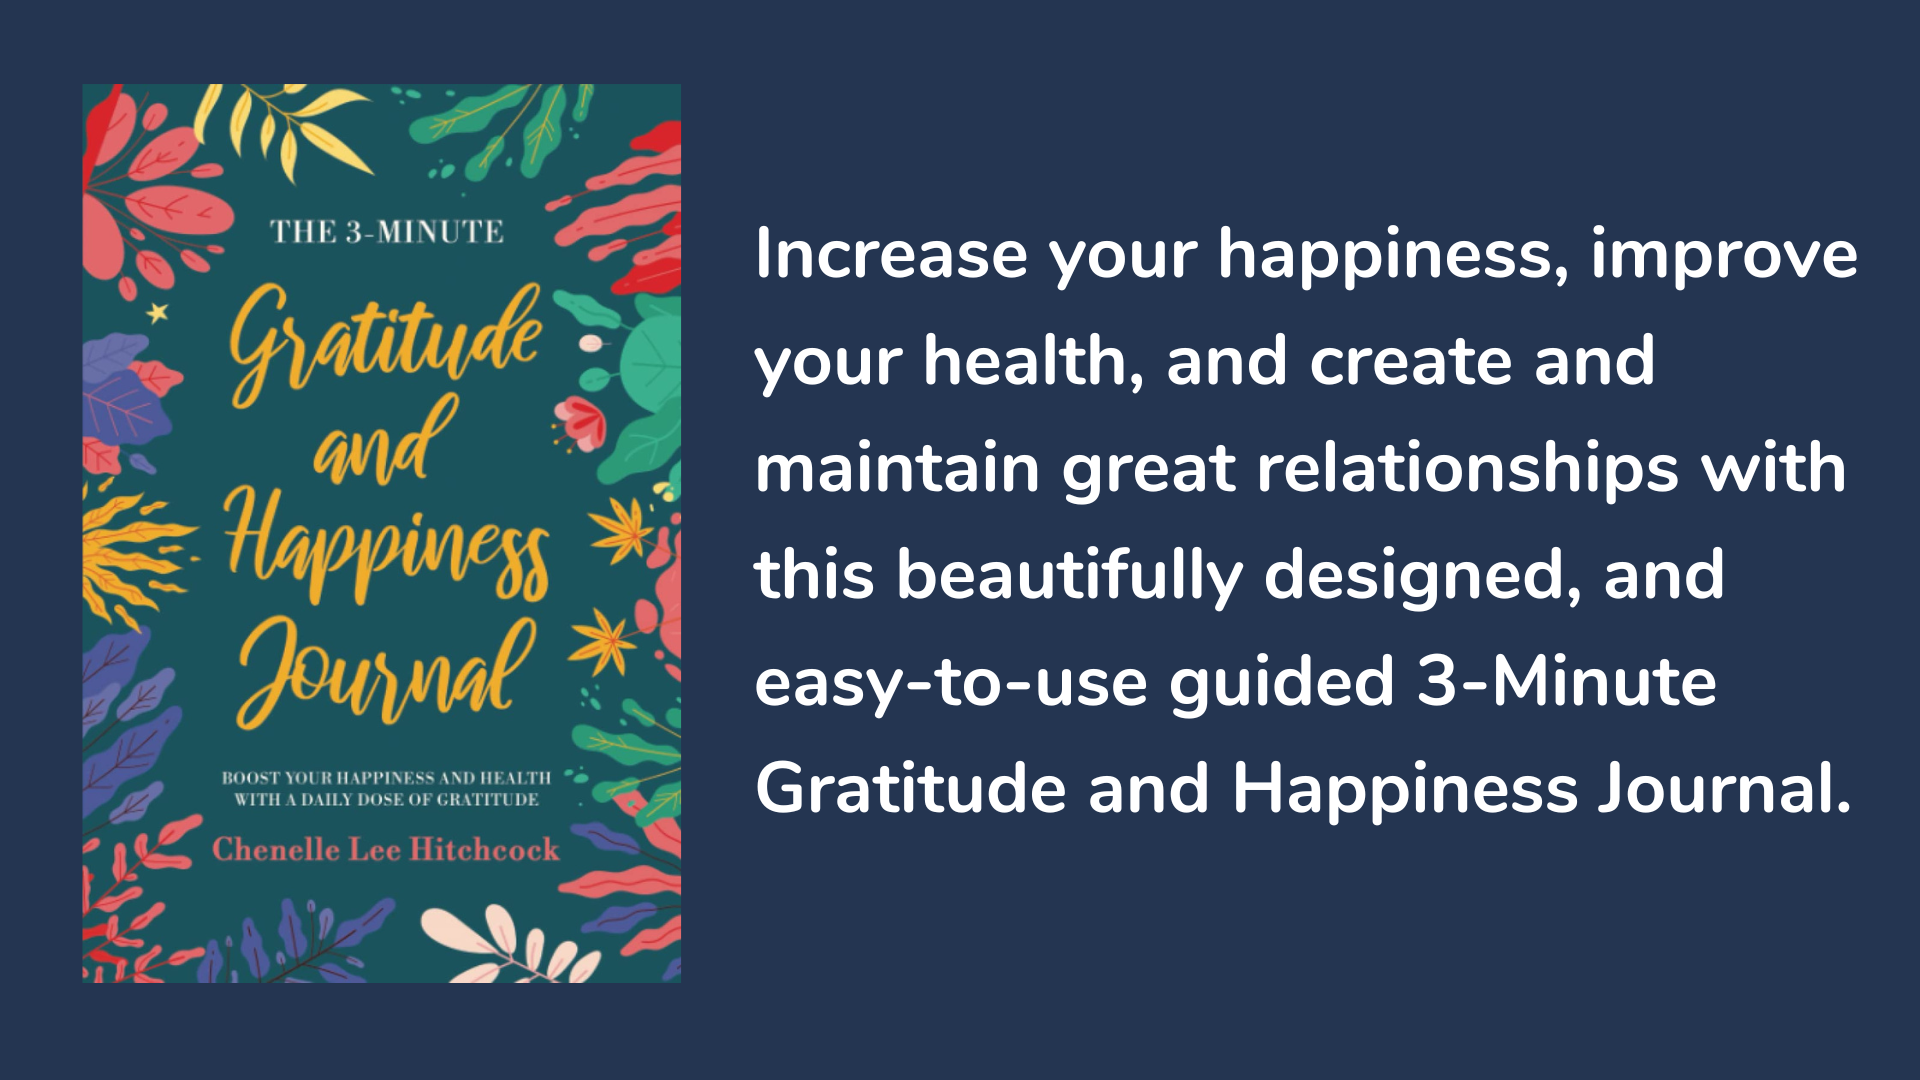 The 3 Minute Gratitude and Happiness Journal book cover and description